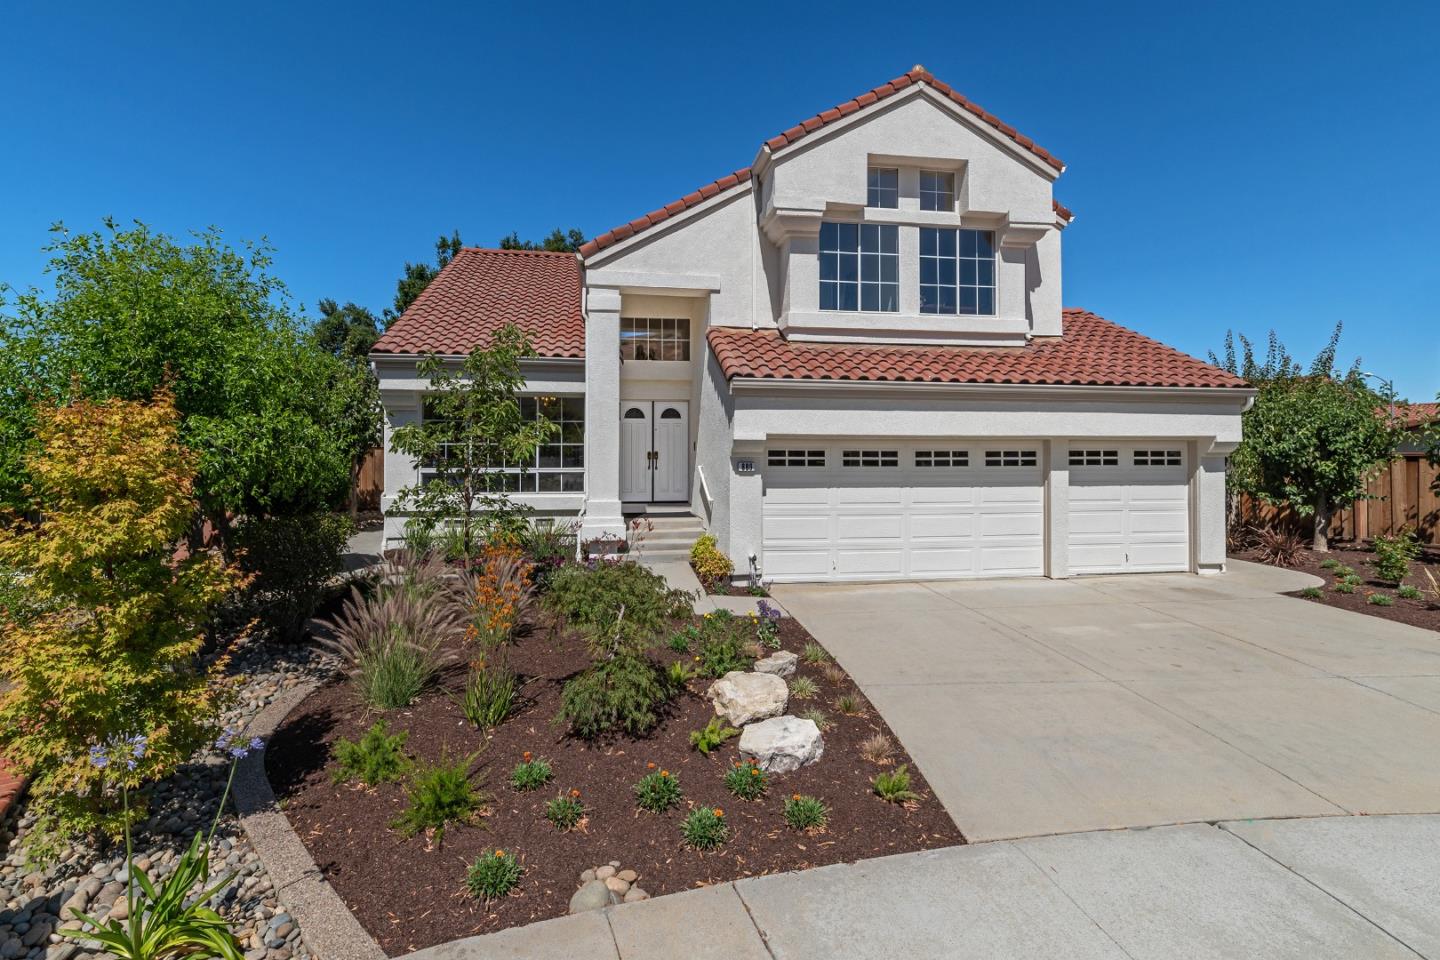 889 Glenview Court Milpitas CA 95035 4 Beds 3 Baths (Sold